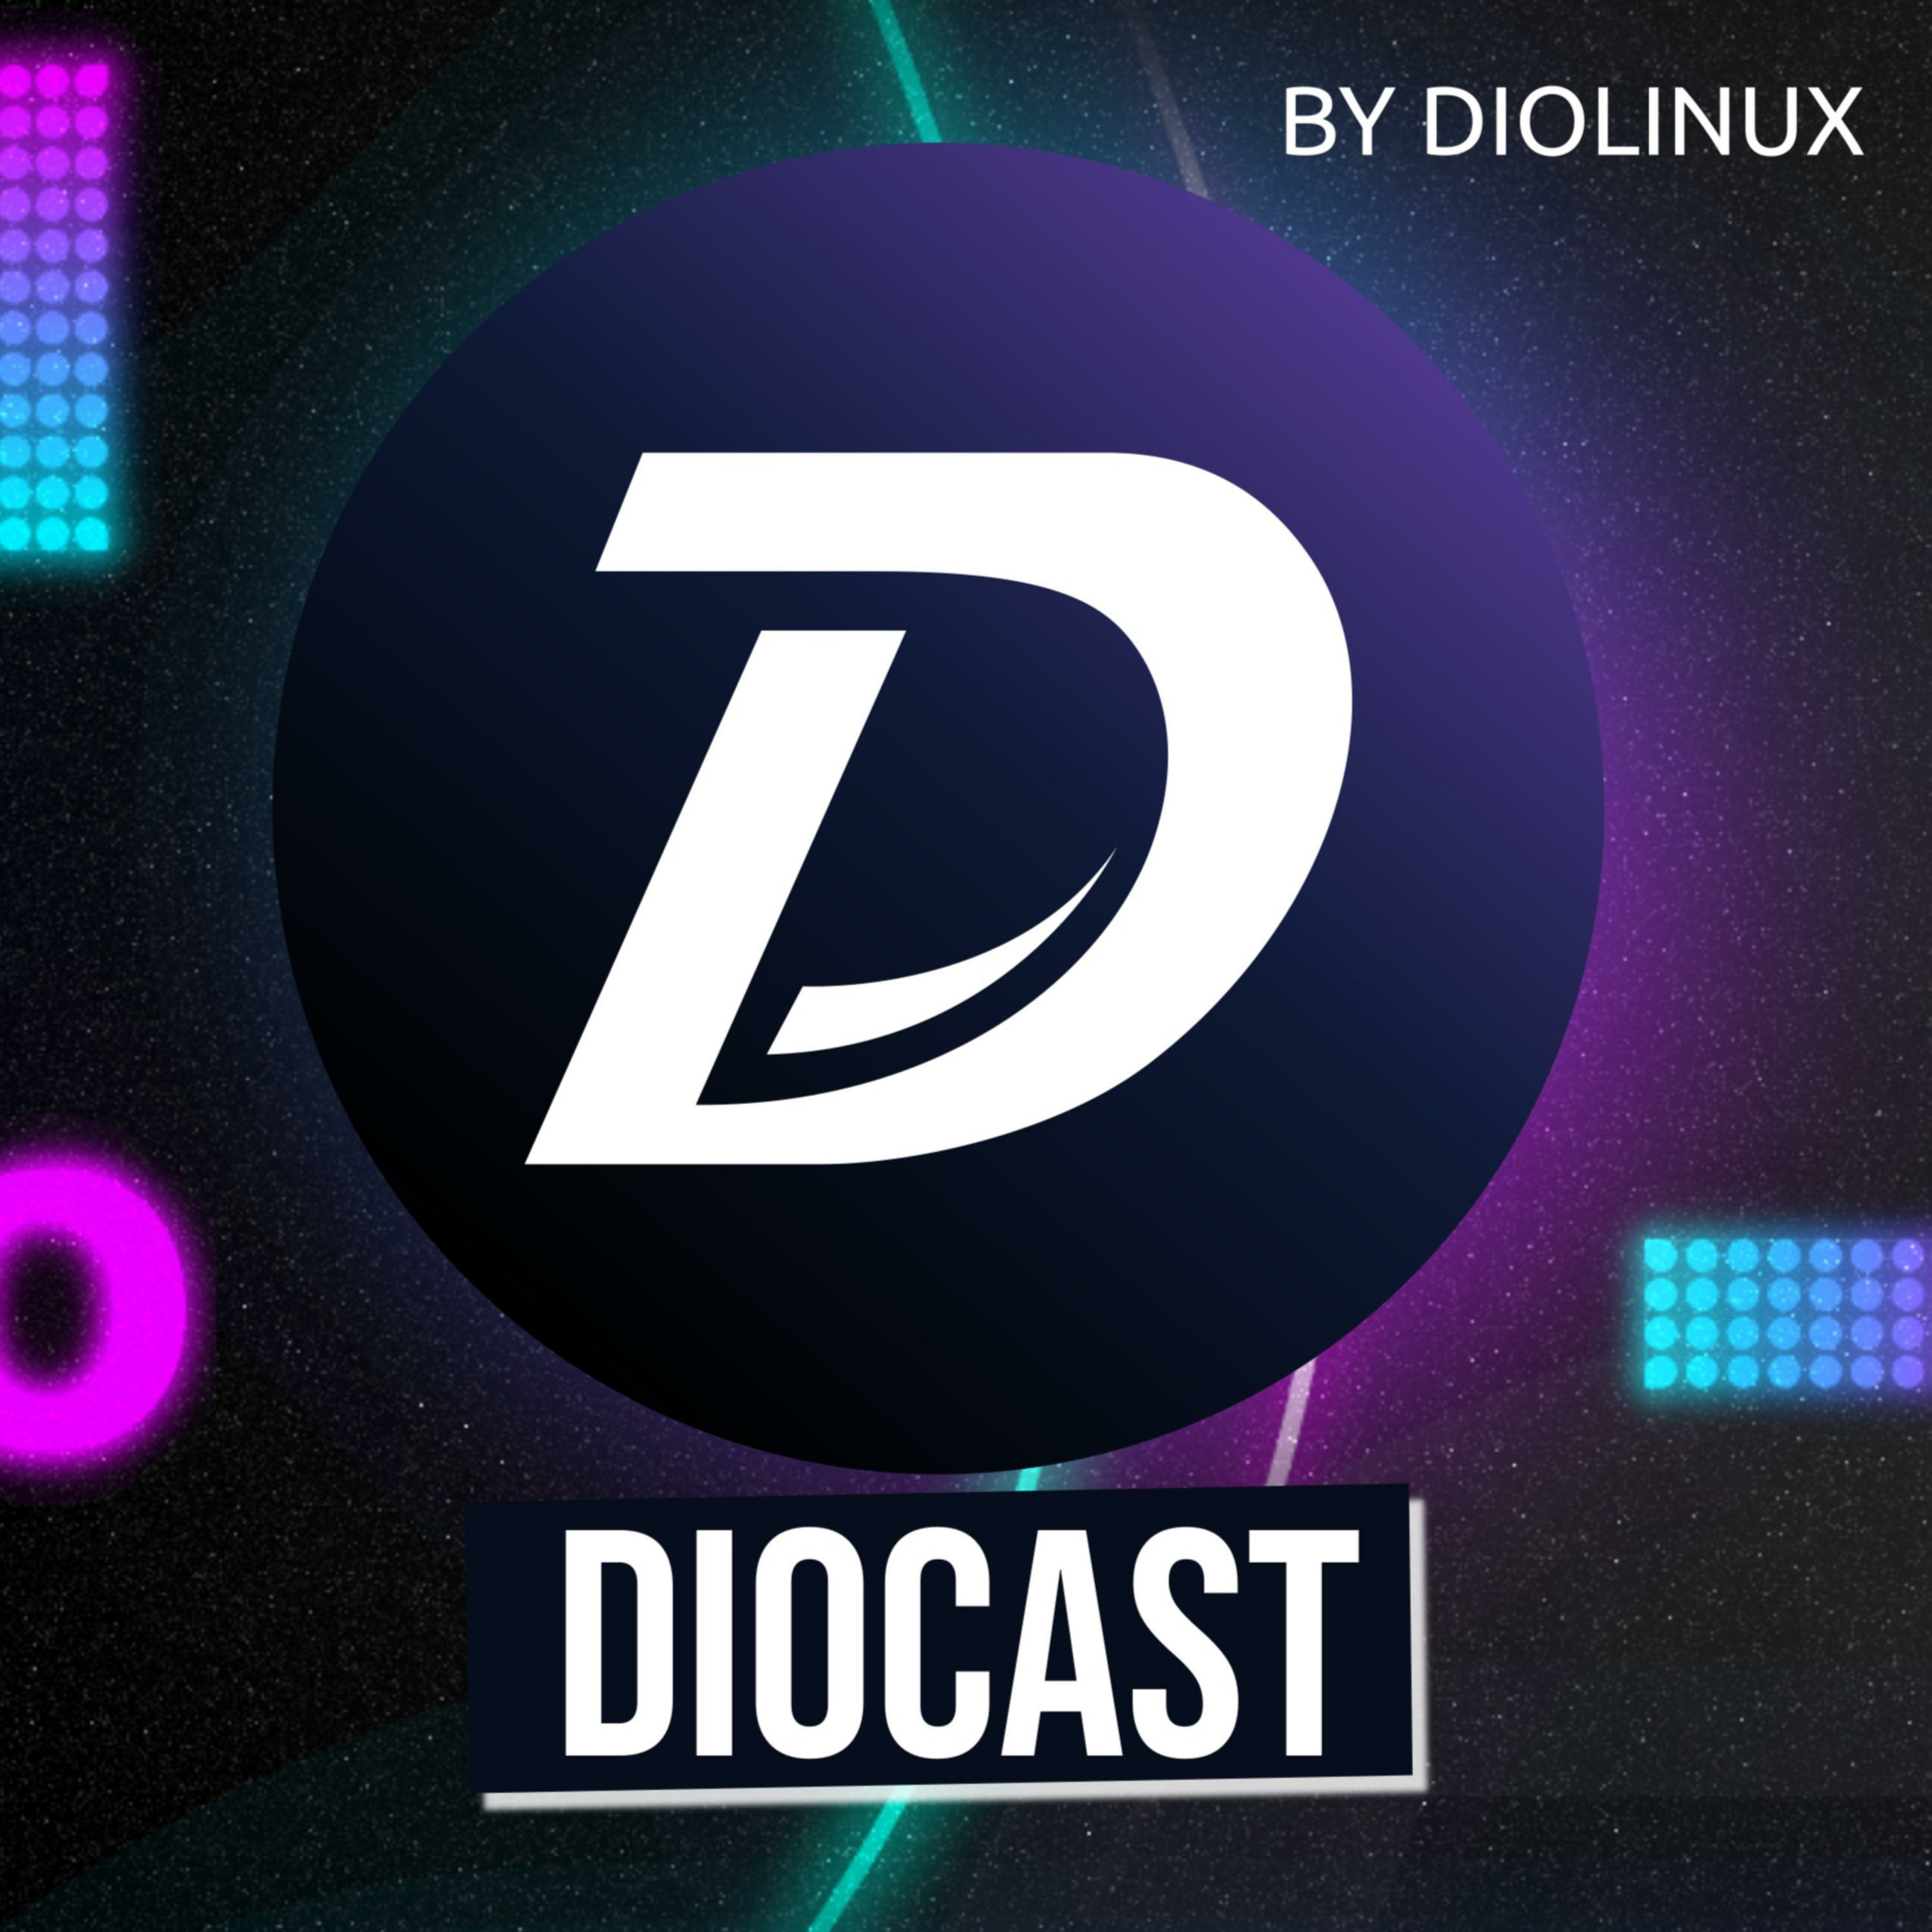 Diocast:Diolinux